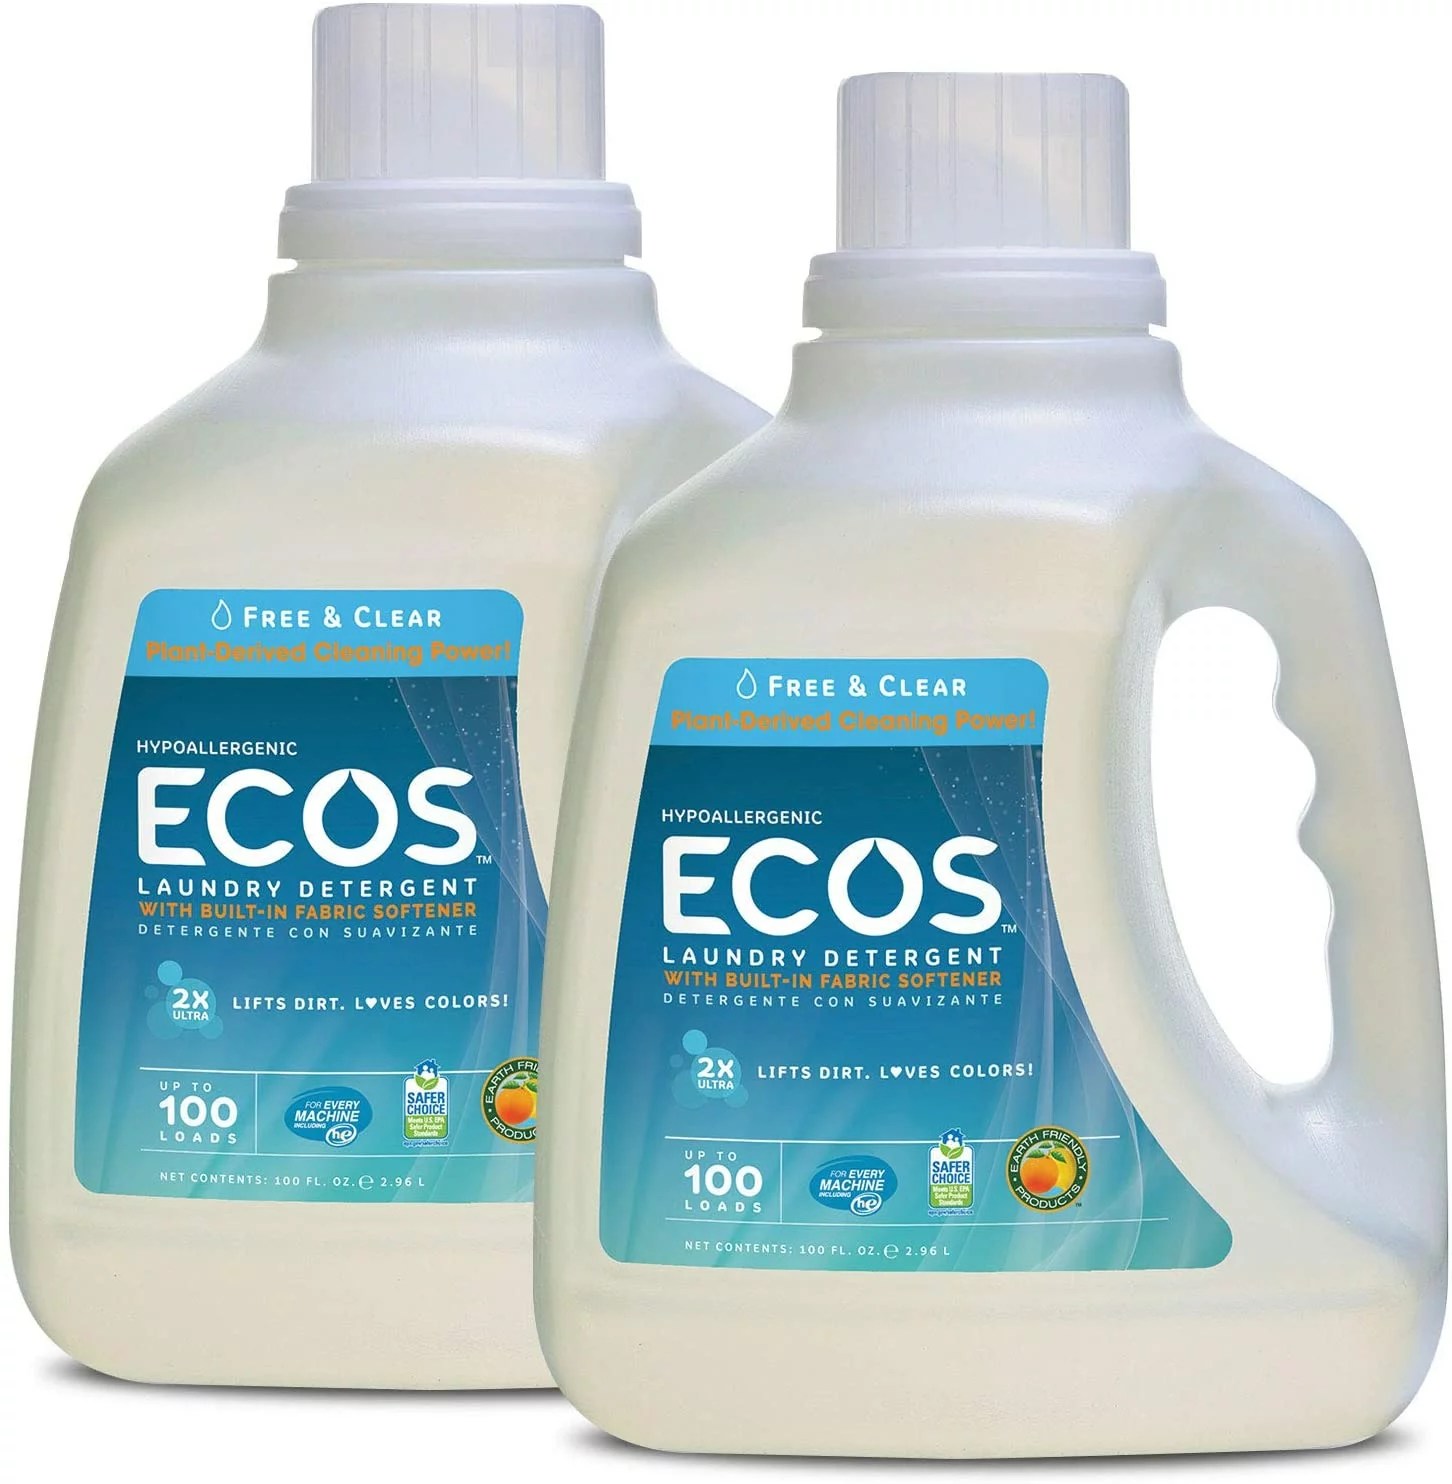 Ecos Liquid Laundry Detergent Free & Clear